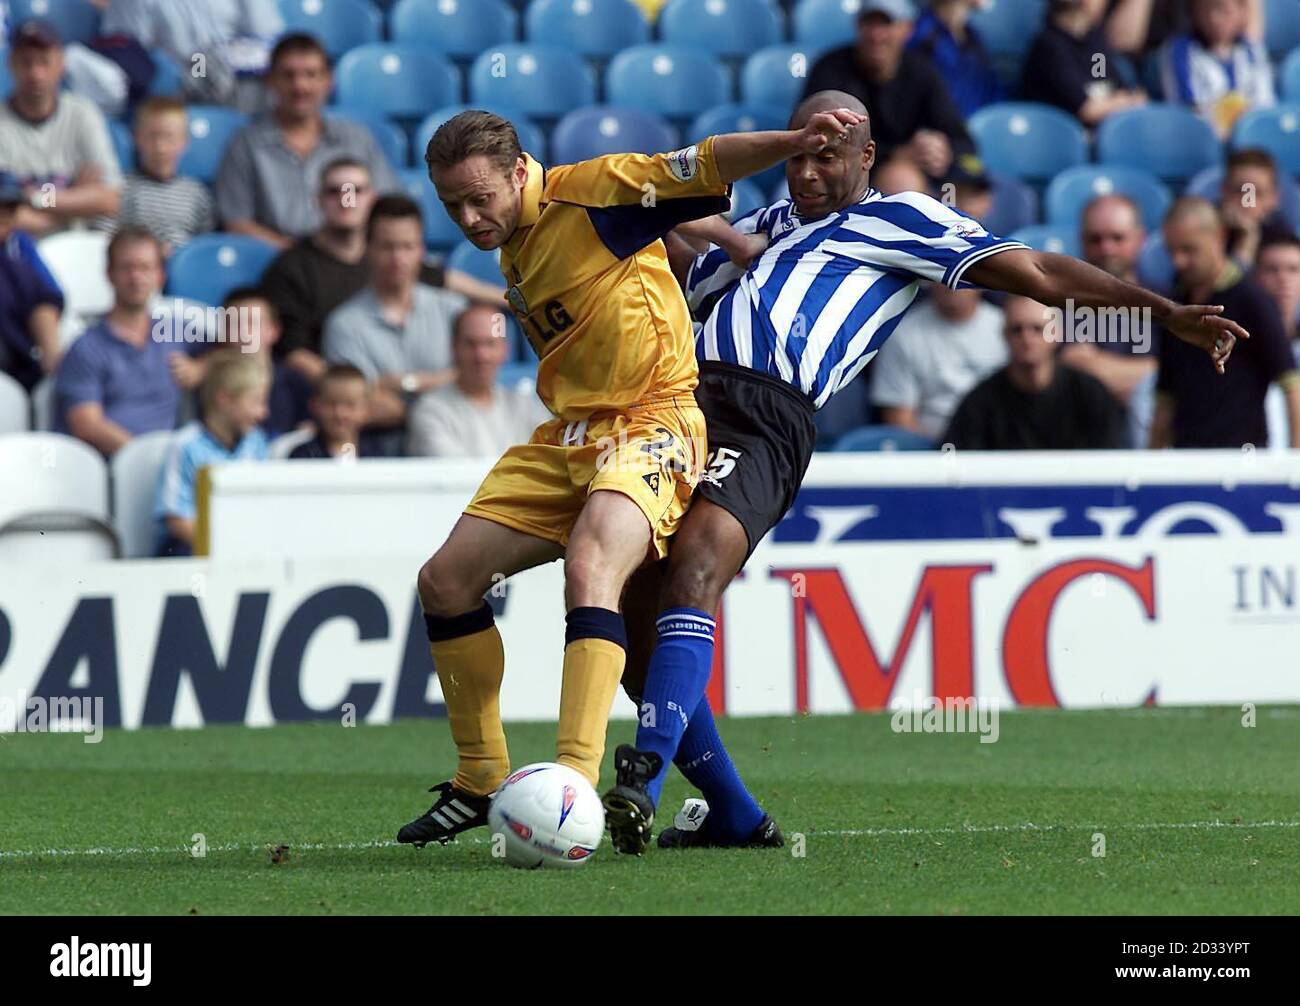 Leicester City's Paul Dickov (left) in action against Sheffield Wednesday's Danny Maddix, during their Nationwide Division One match at Sheffield's Hillsborough ground. THIS PICTURE CAN ONLY BE USED WITHIN THE CONTEXT OF AN EDITORIAL FEATURE. NO UNOFFICIAL CLUB WEBSITE USE. Stock Photo